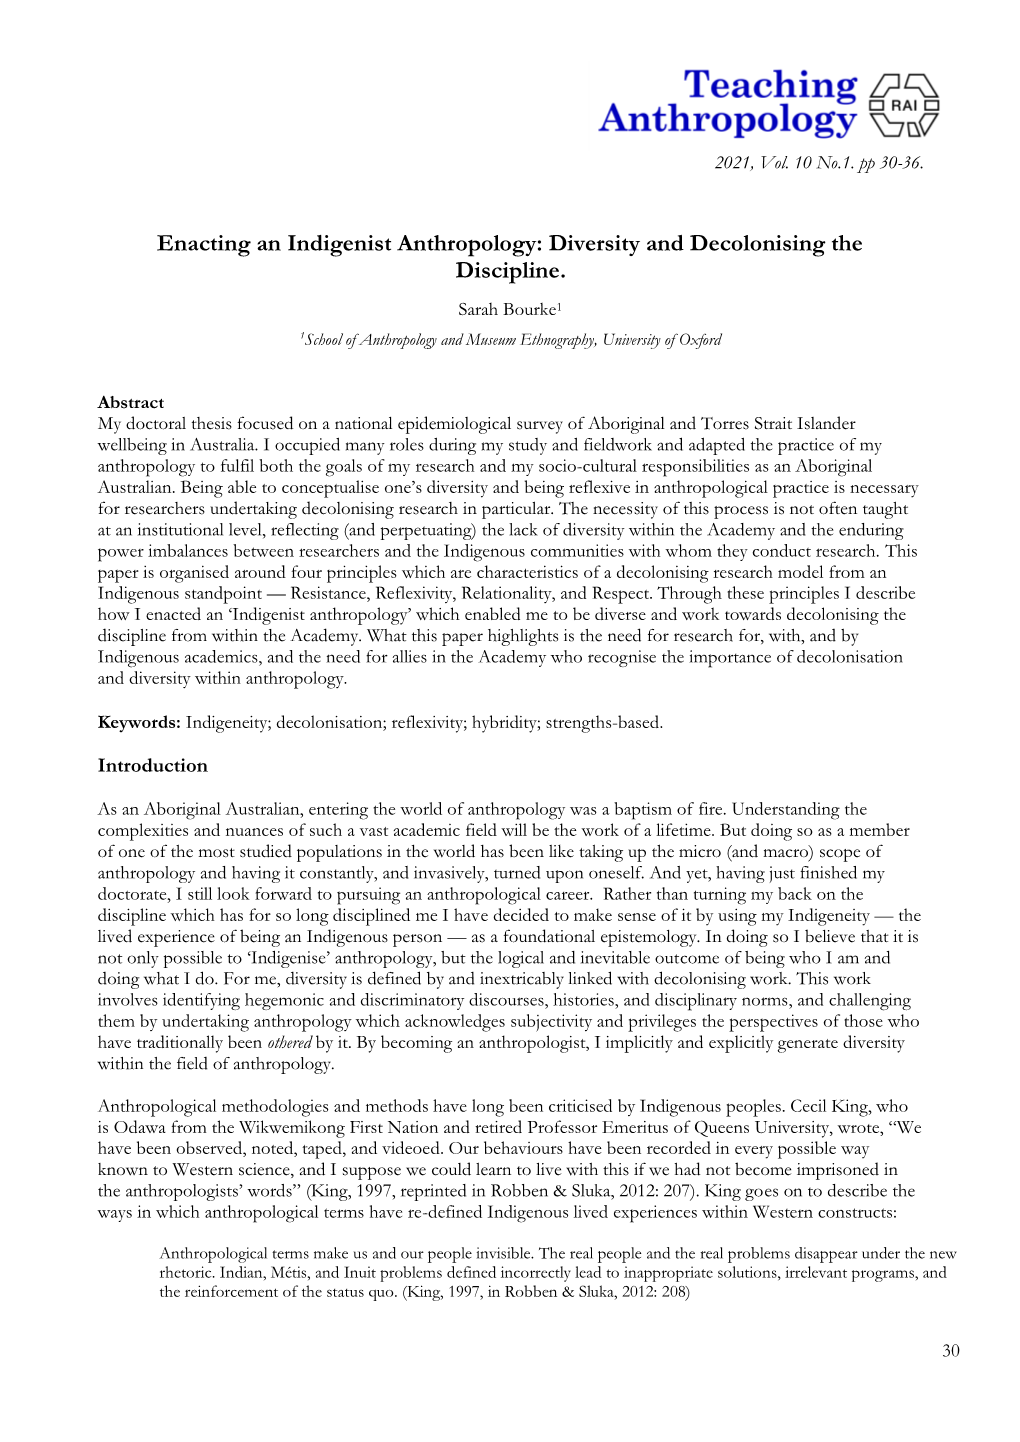 Enacting an Indigenist Anthropology: Diversity and Decolonising the Discipline